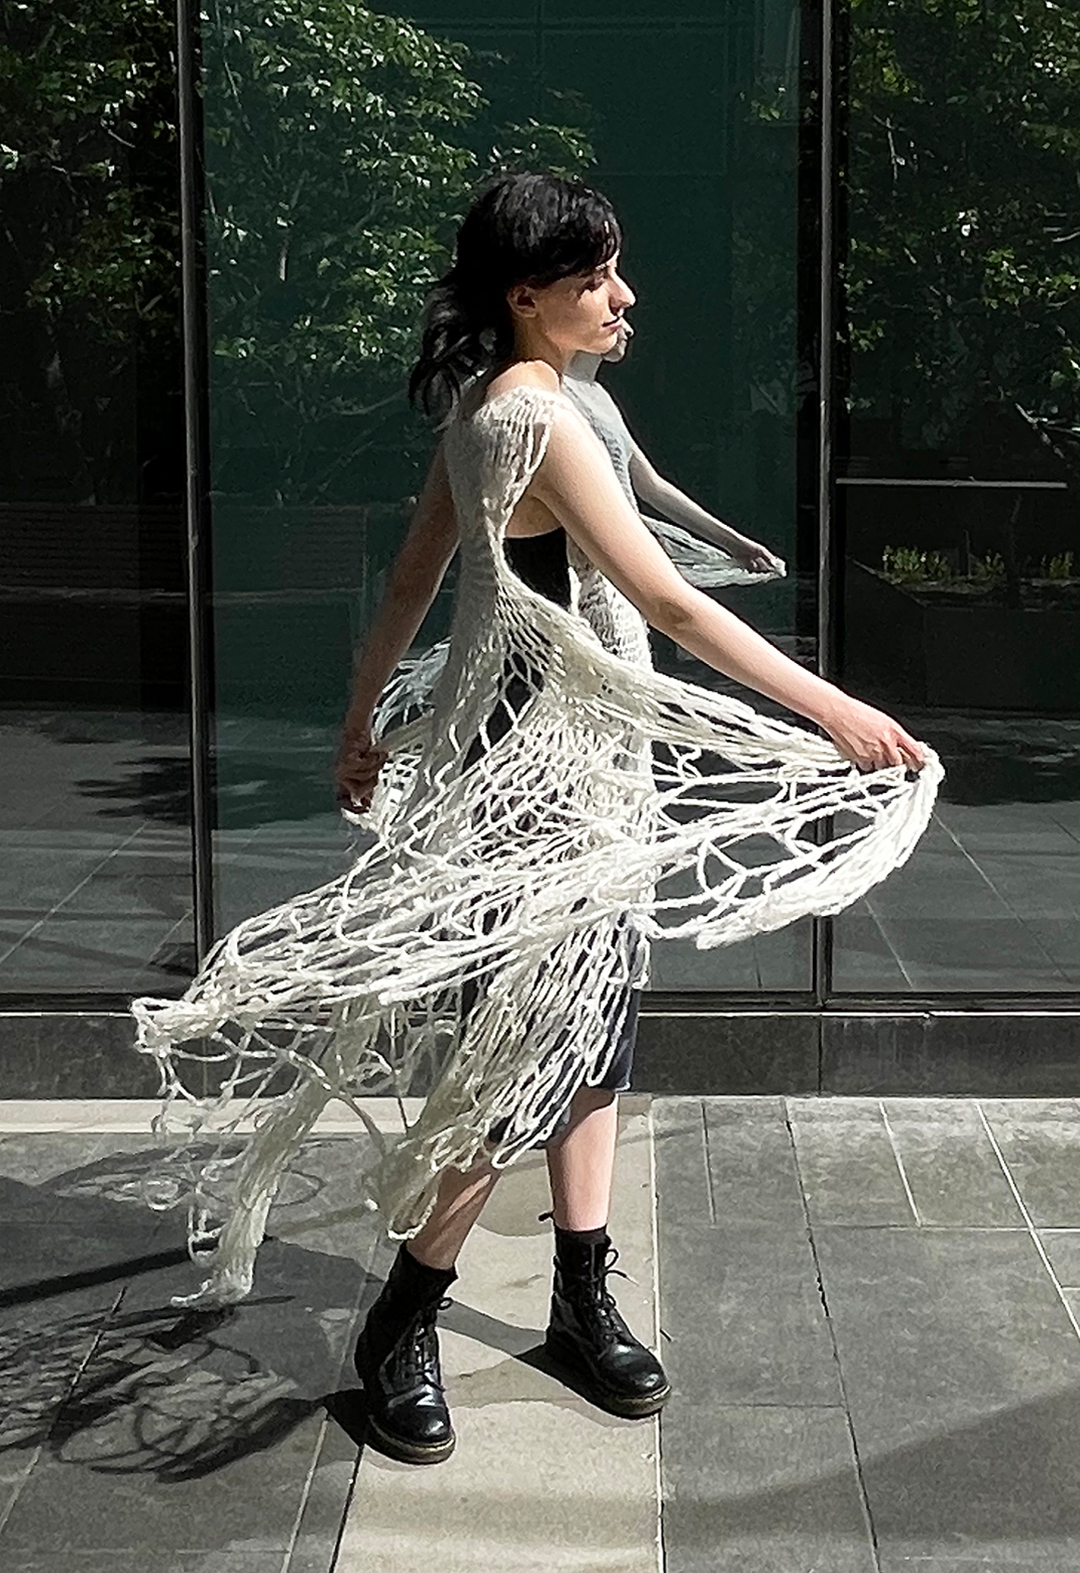 Side view of a model wearing a hand crocheted white lace suri alpaca dress. The model is swinging the hem of the dress. She is wearing combat boots and there is a glass building in the background, with reflection of trees.